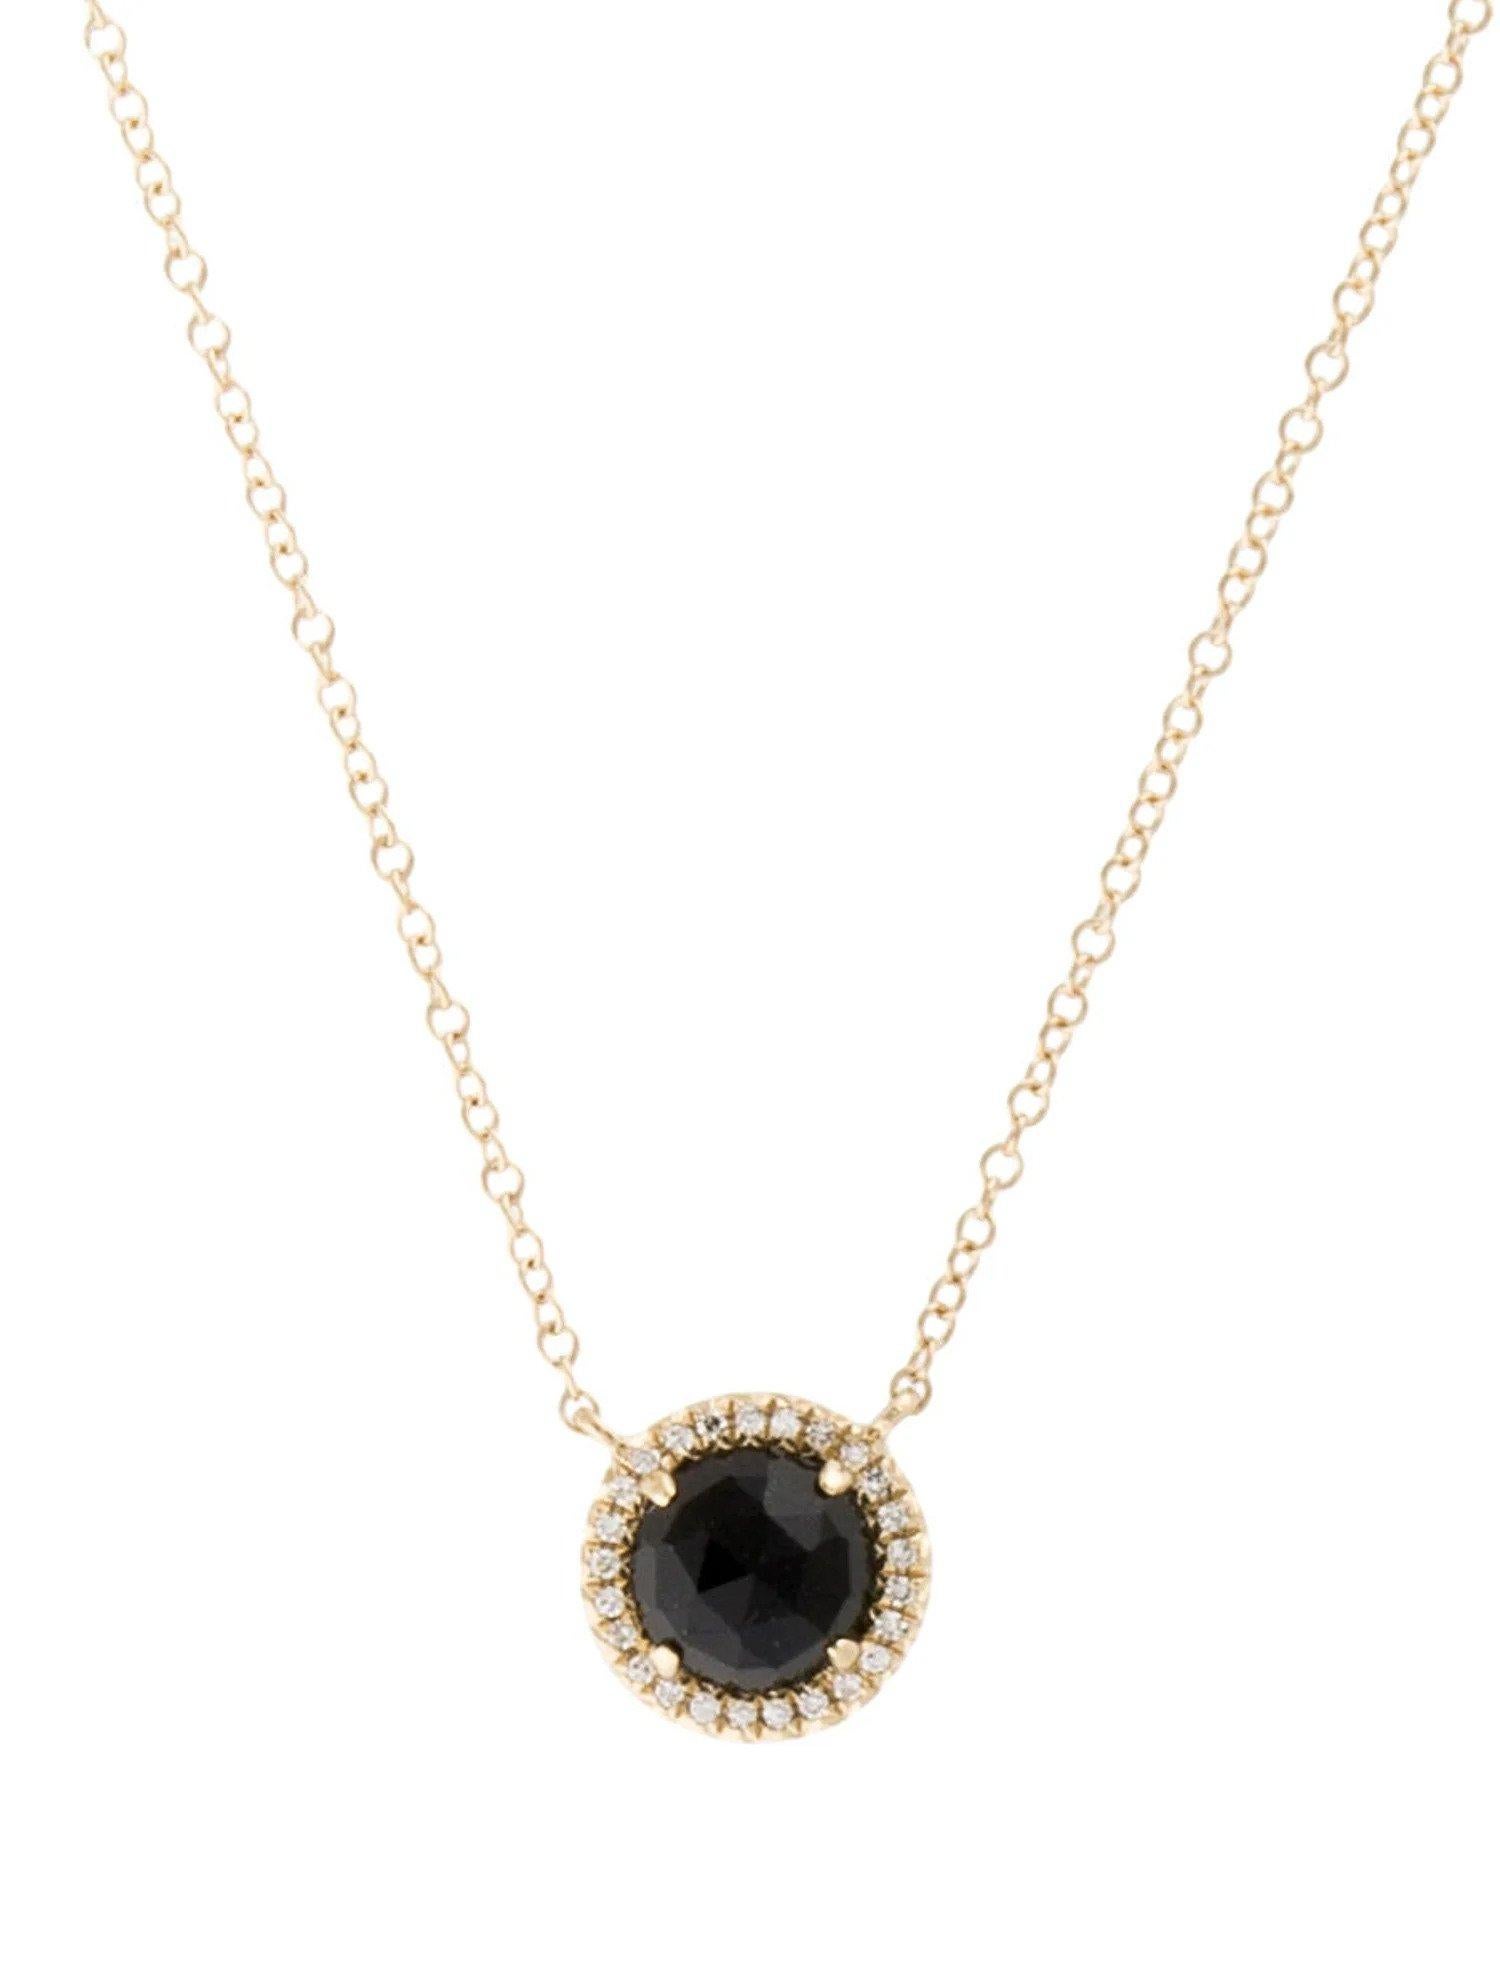 1.00 Carat Round Black Onyx & Diamond Yellow Gold Pendant Necklace  In New Condition For Sale In Great Neck, NY